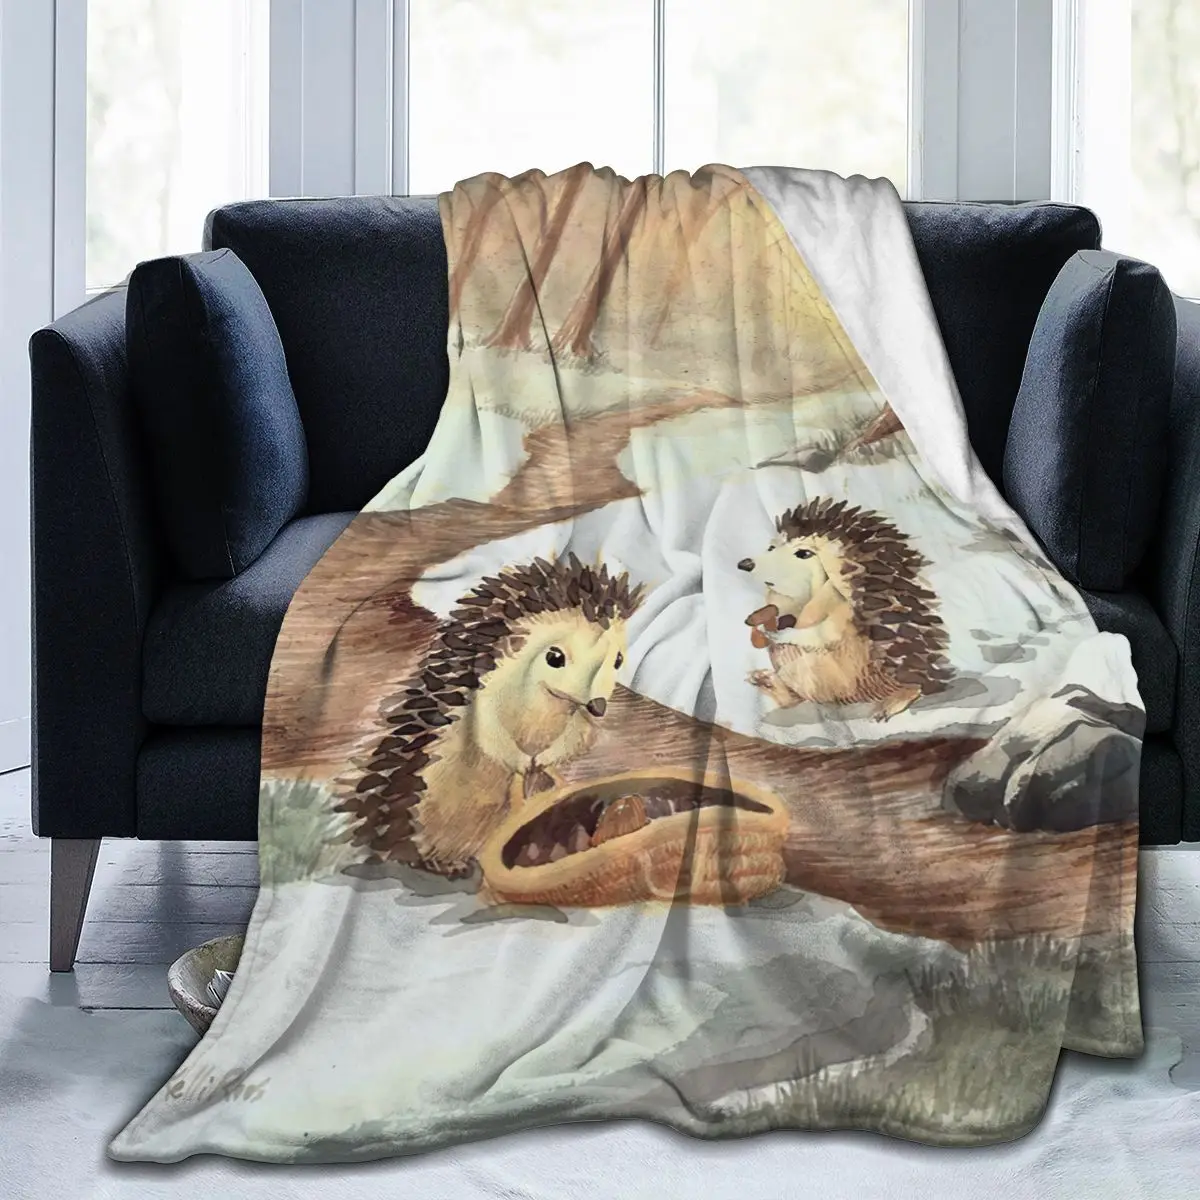 

Ultra Soft Sofa Blanket Cover Blanket Cartoon Cartoon Bedding Flannel plied Sofa Bedroom Decor for Children and Adults 278476691